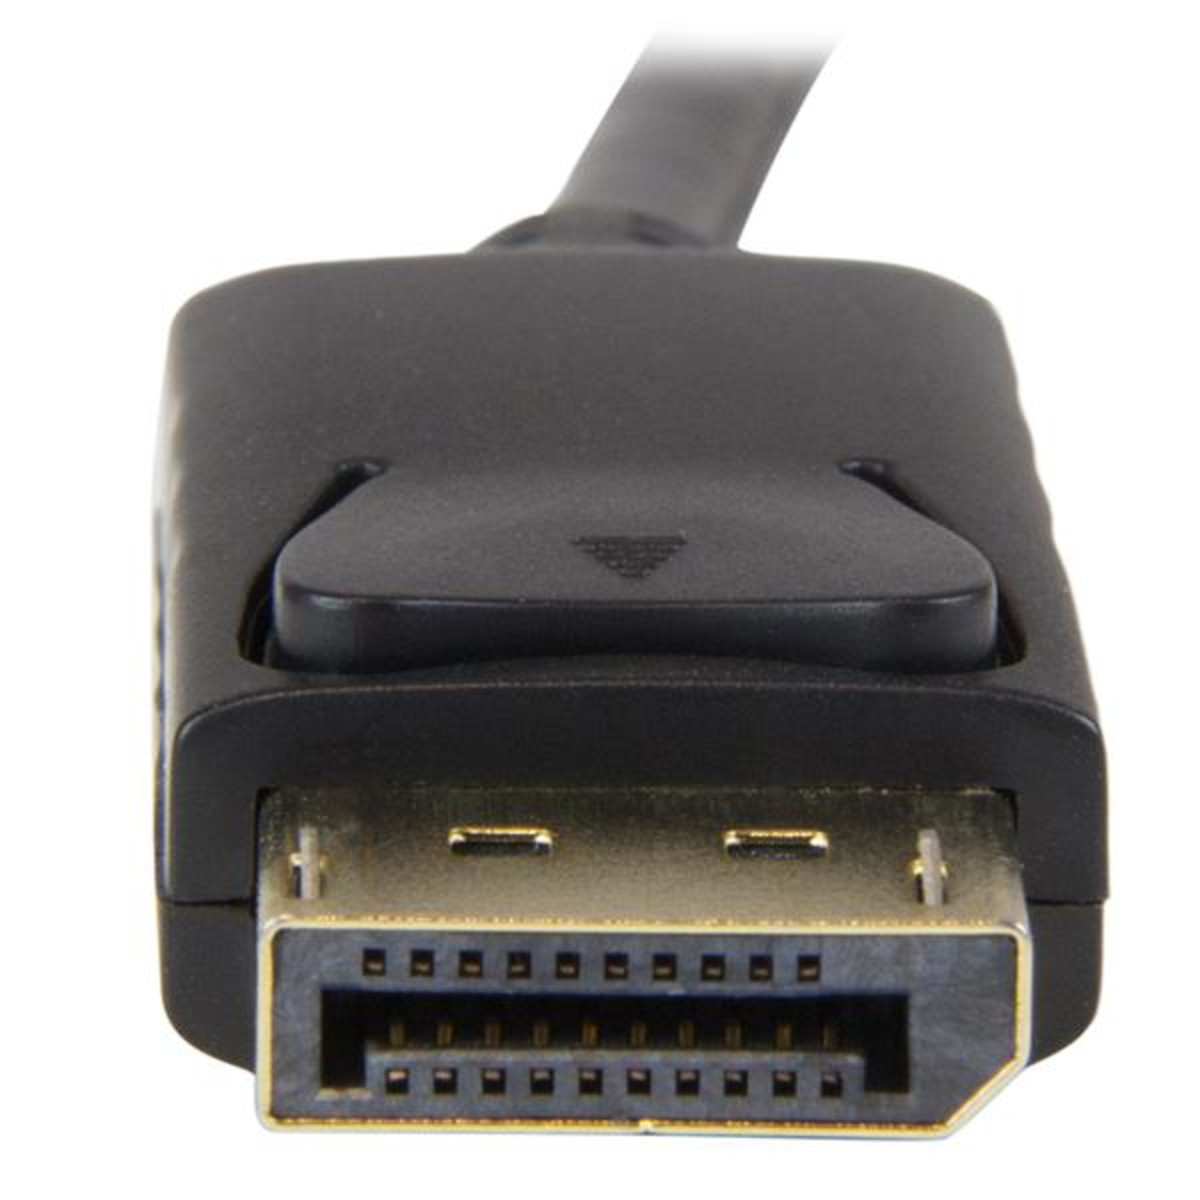 DisplayP to HDMI converter cable